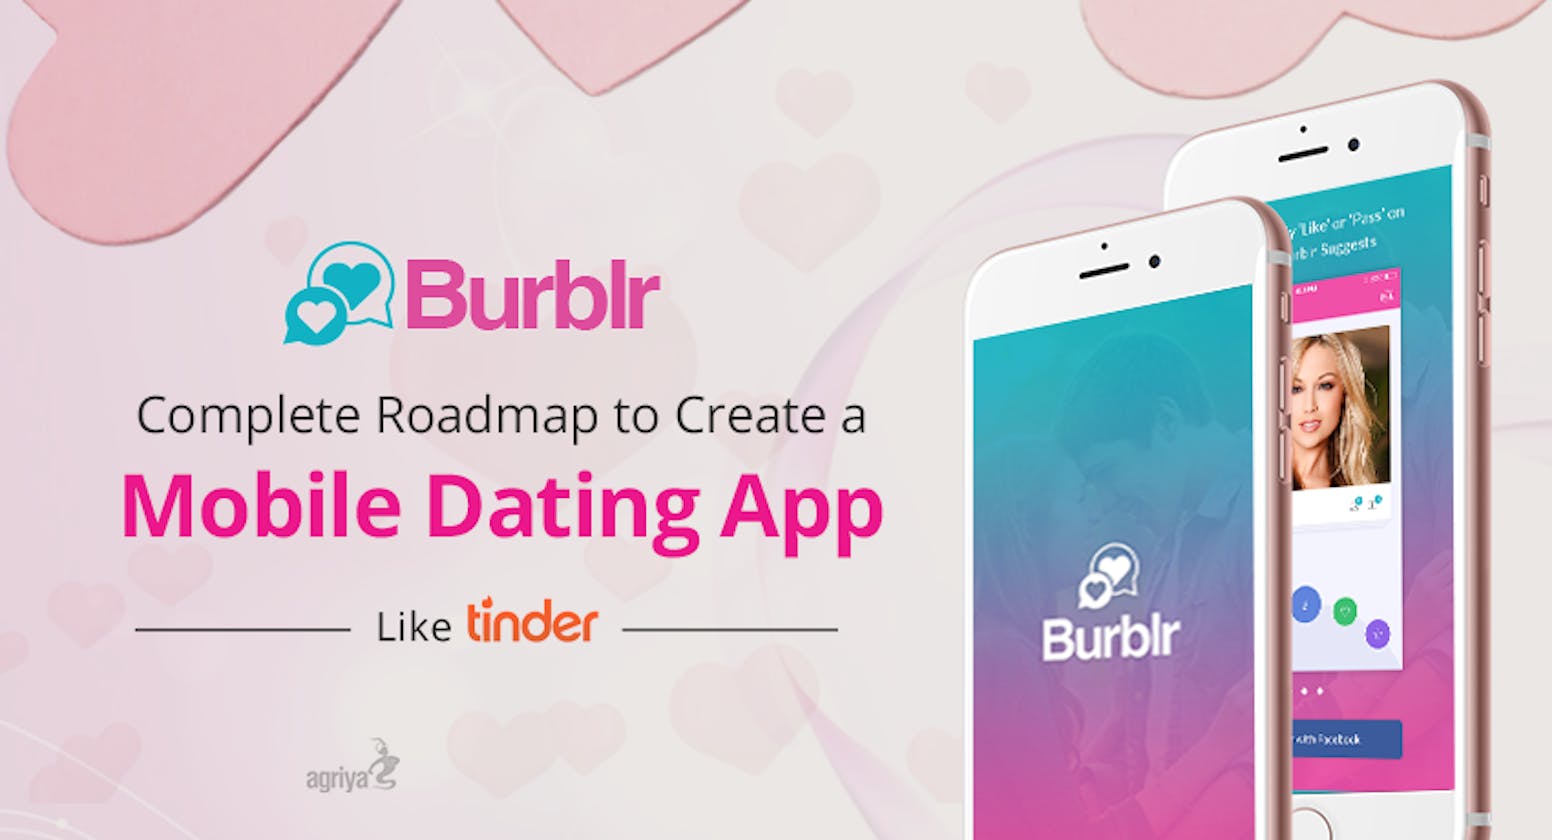 Complete Roadmap to Create a Mobile Dating App like Tinder